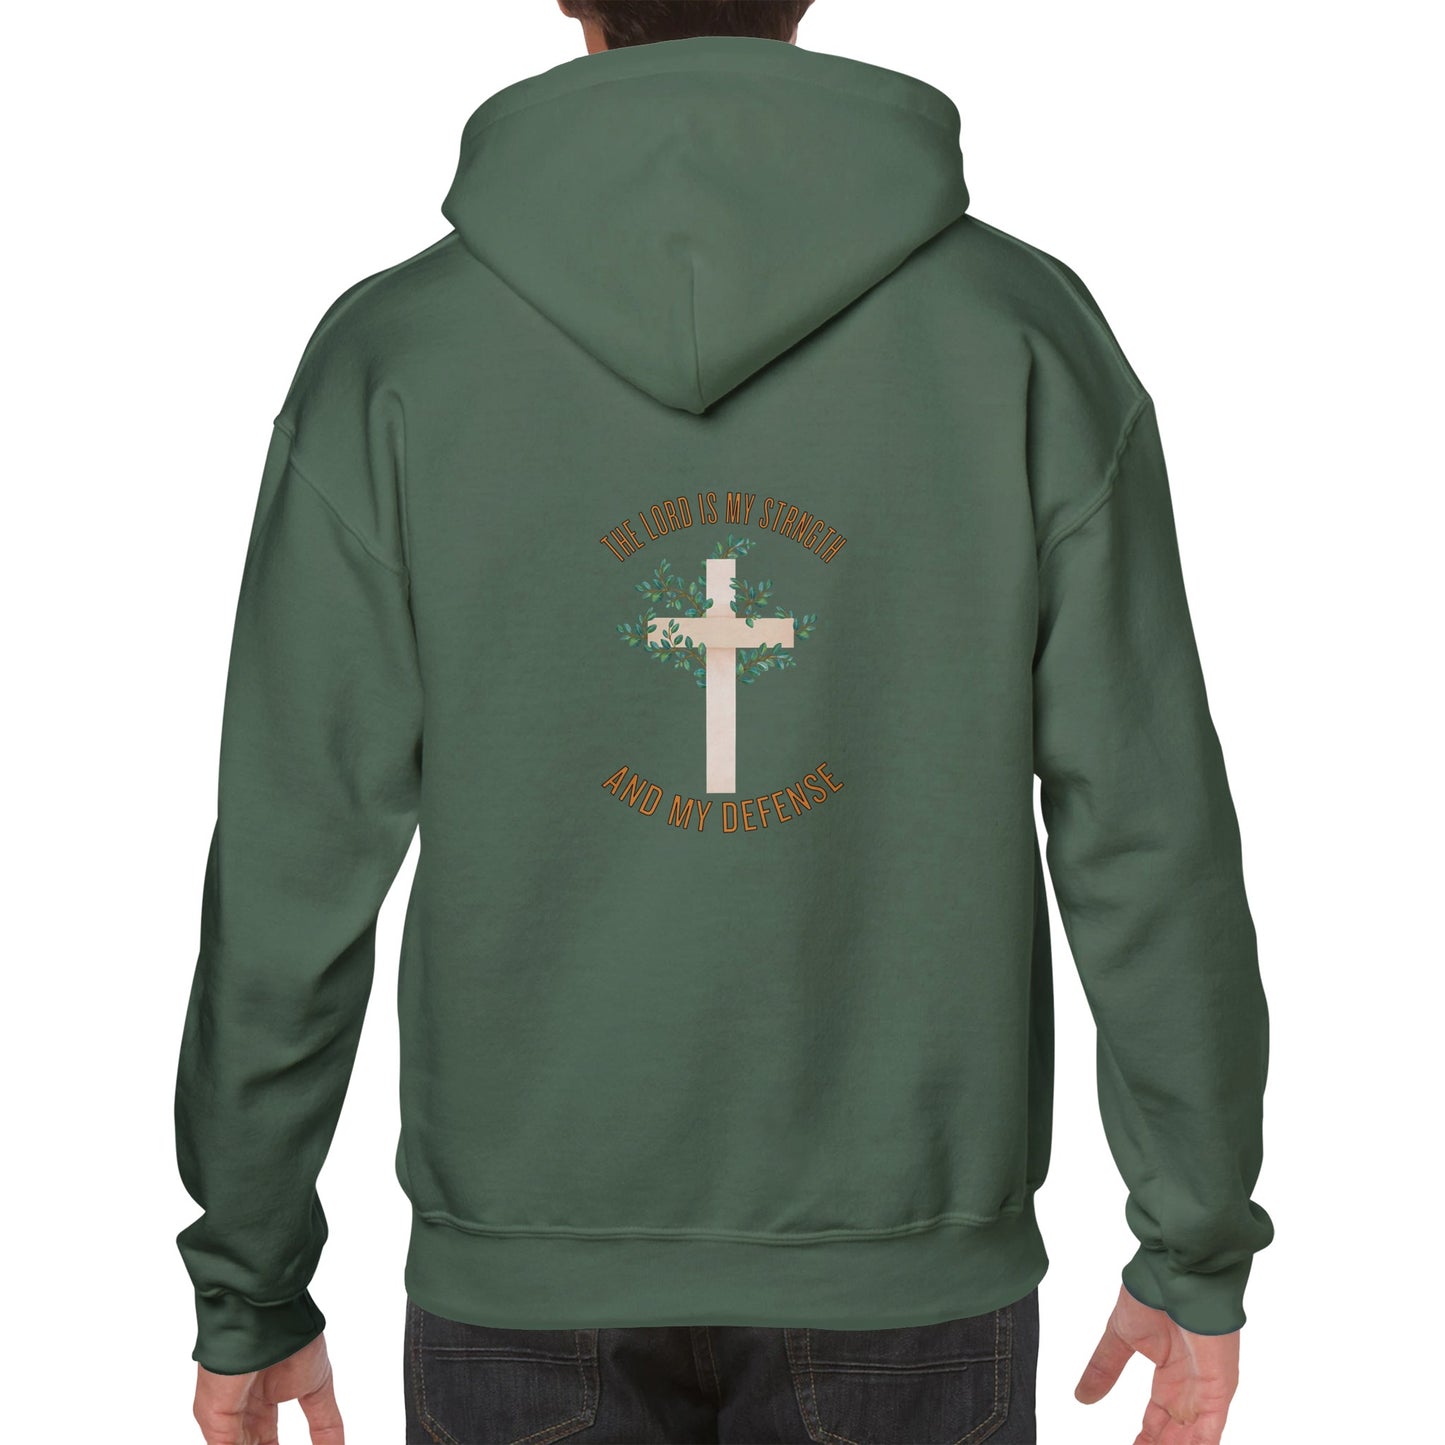 The Lord is My strength- Hoodie